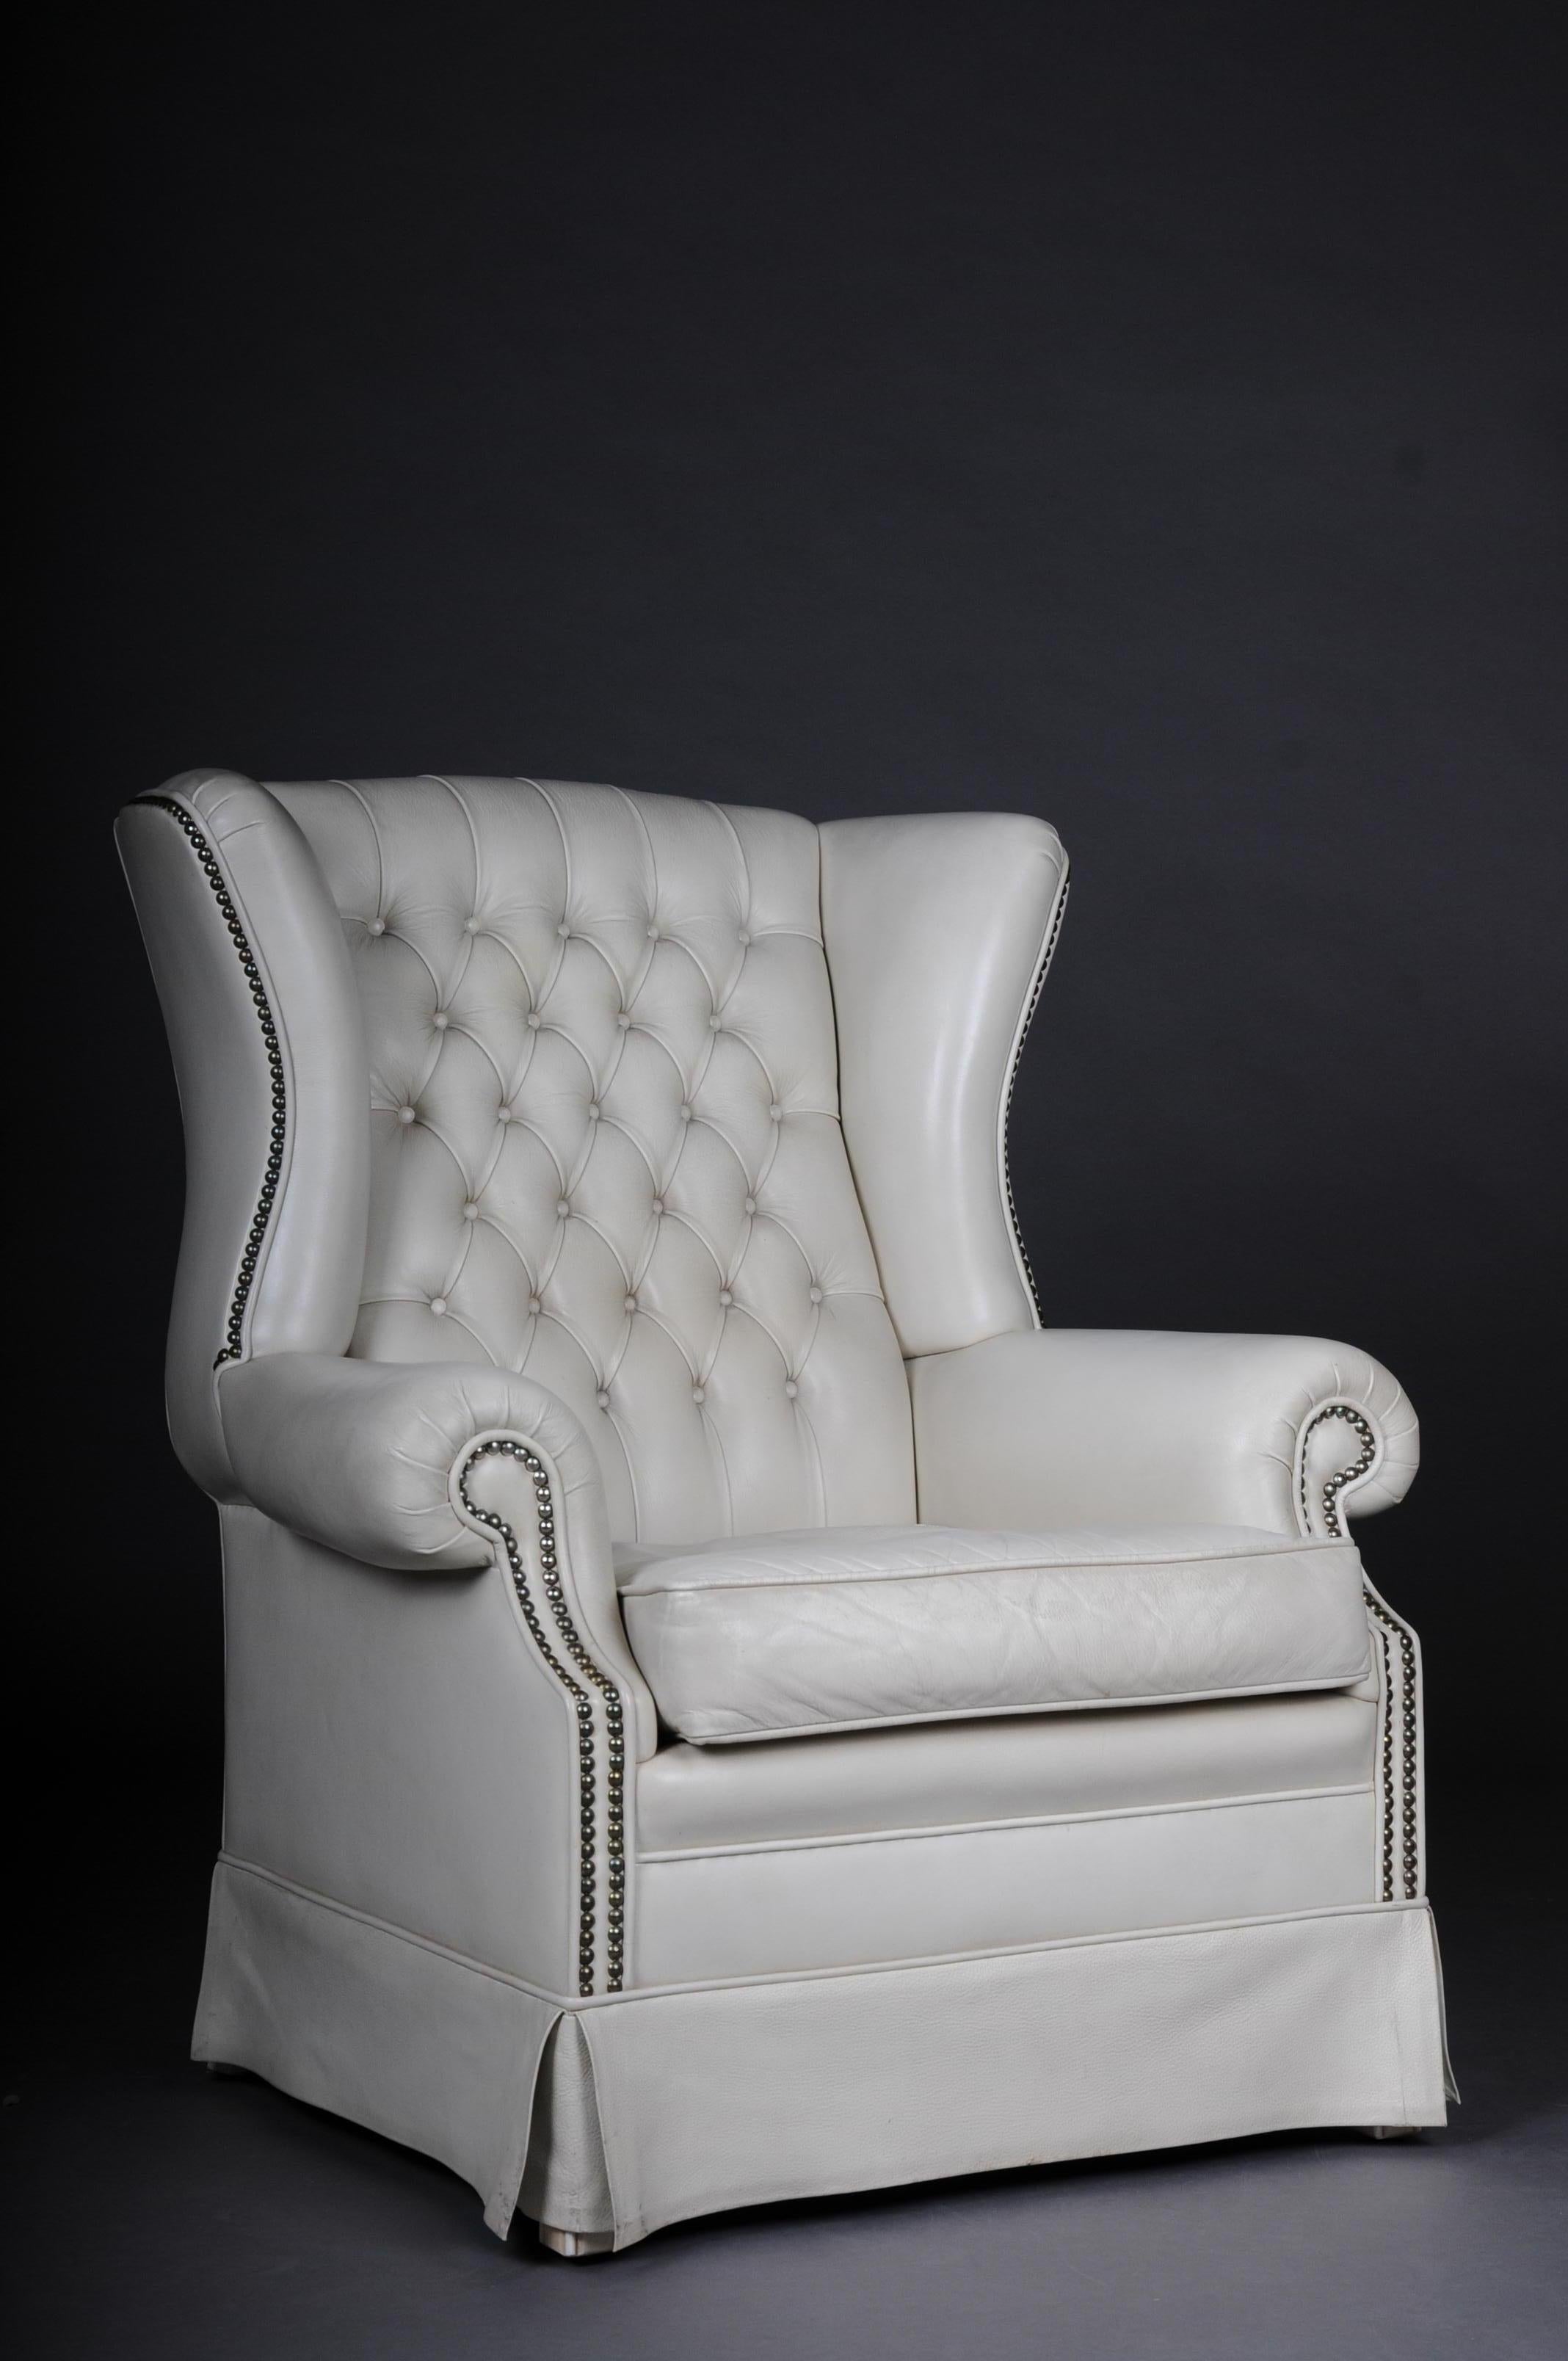 Beautiful vintage Chesterfield armchair / club chair, white

Complete upholstery in Chesterfield. Classic shape and extremely comfortable. 20th century
High and wide back for optimal comfort. Real leather, white. Removable seat cushion.
Elegant